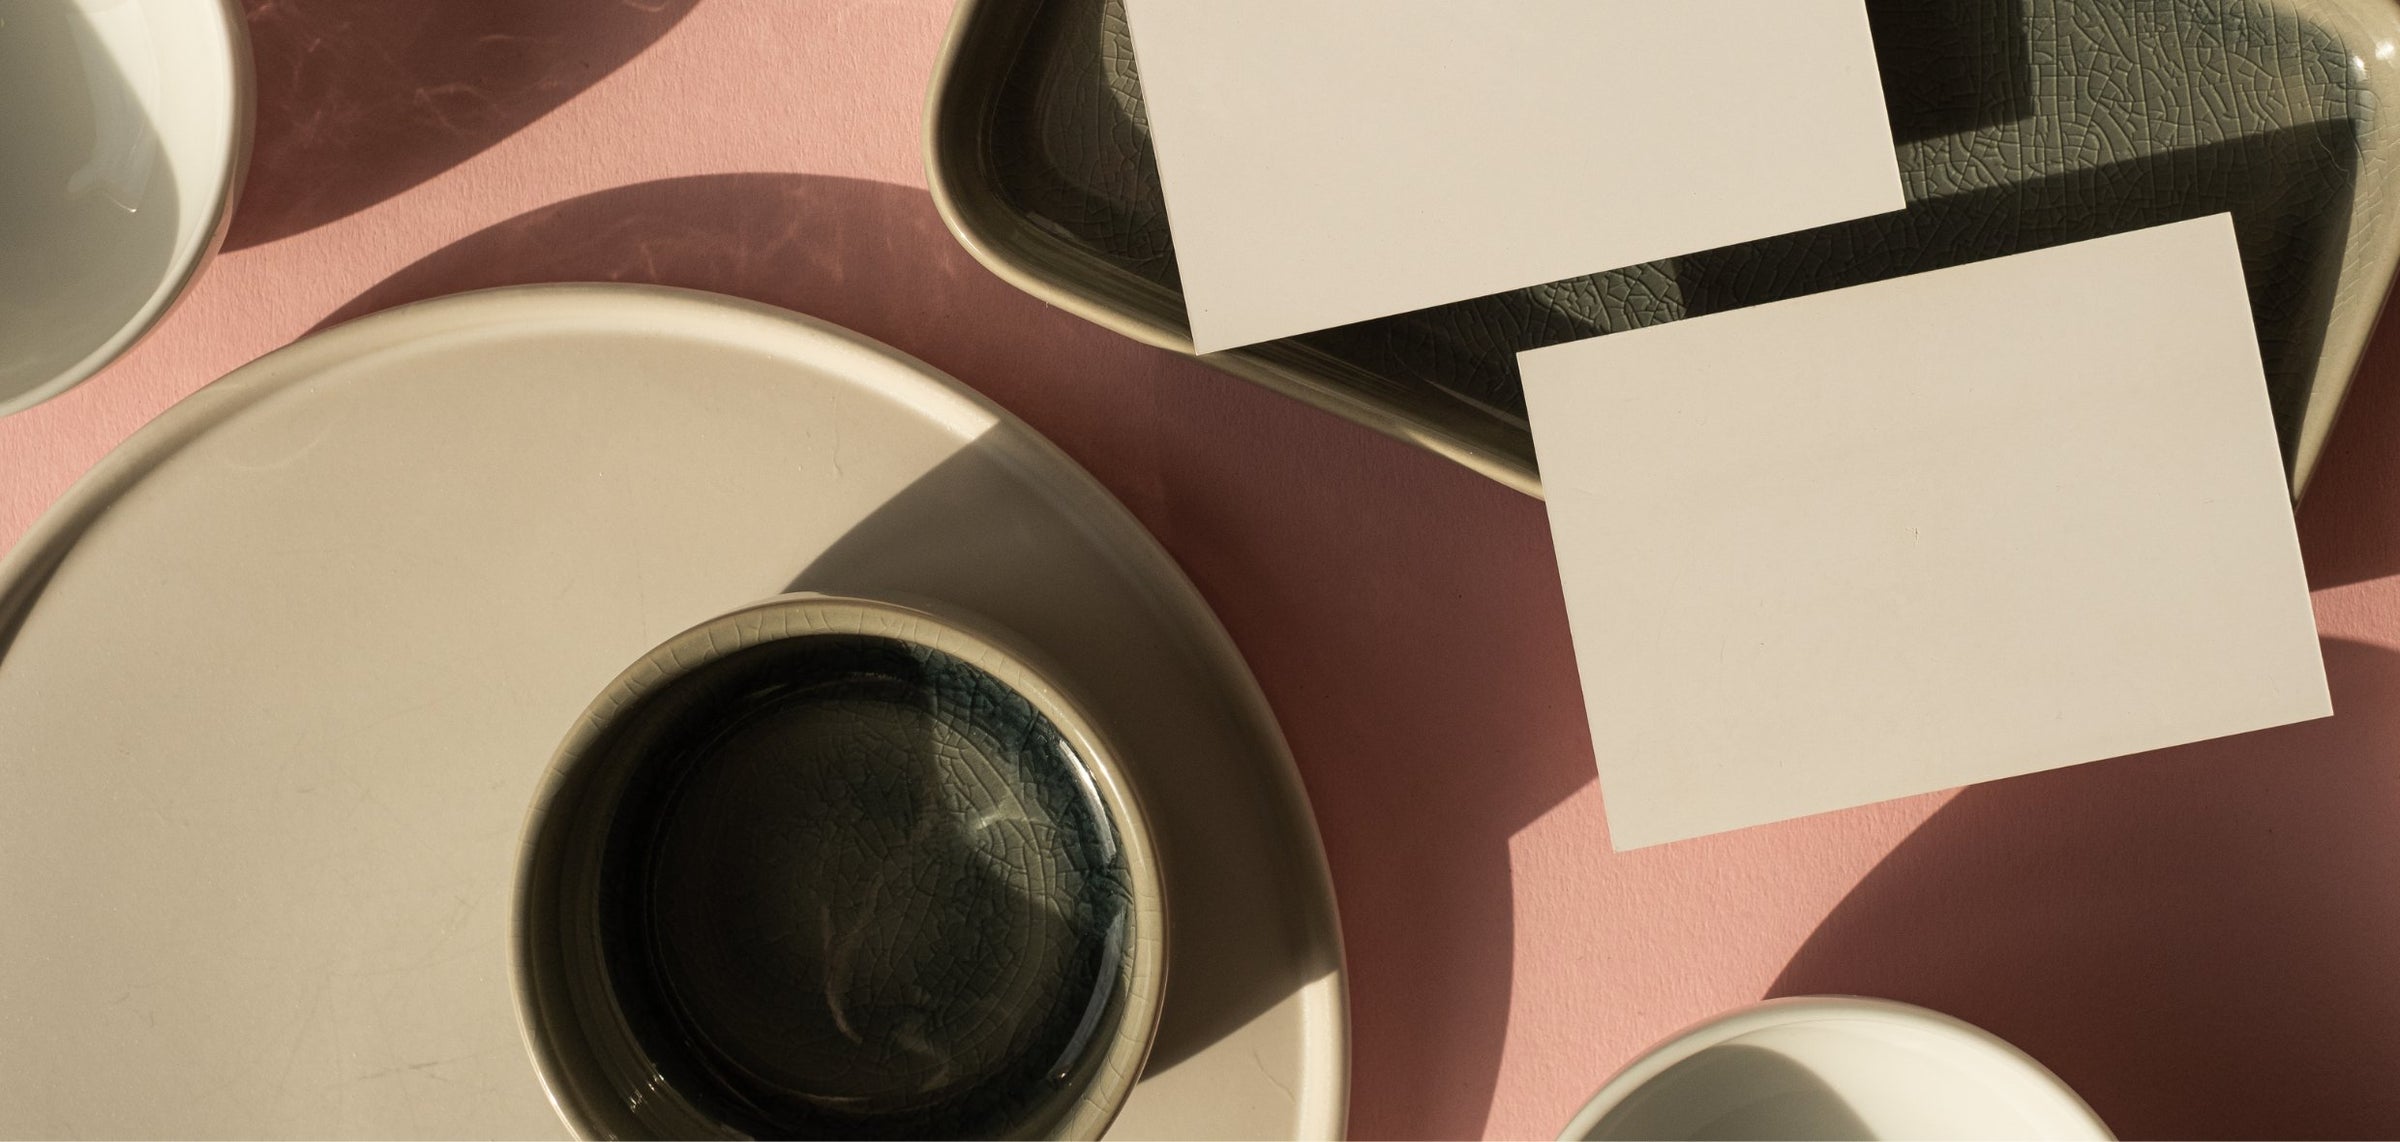 Plates: Sustainable Tableware in Modern Design.